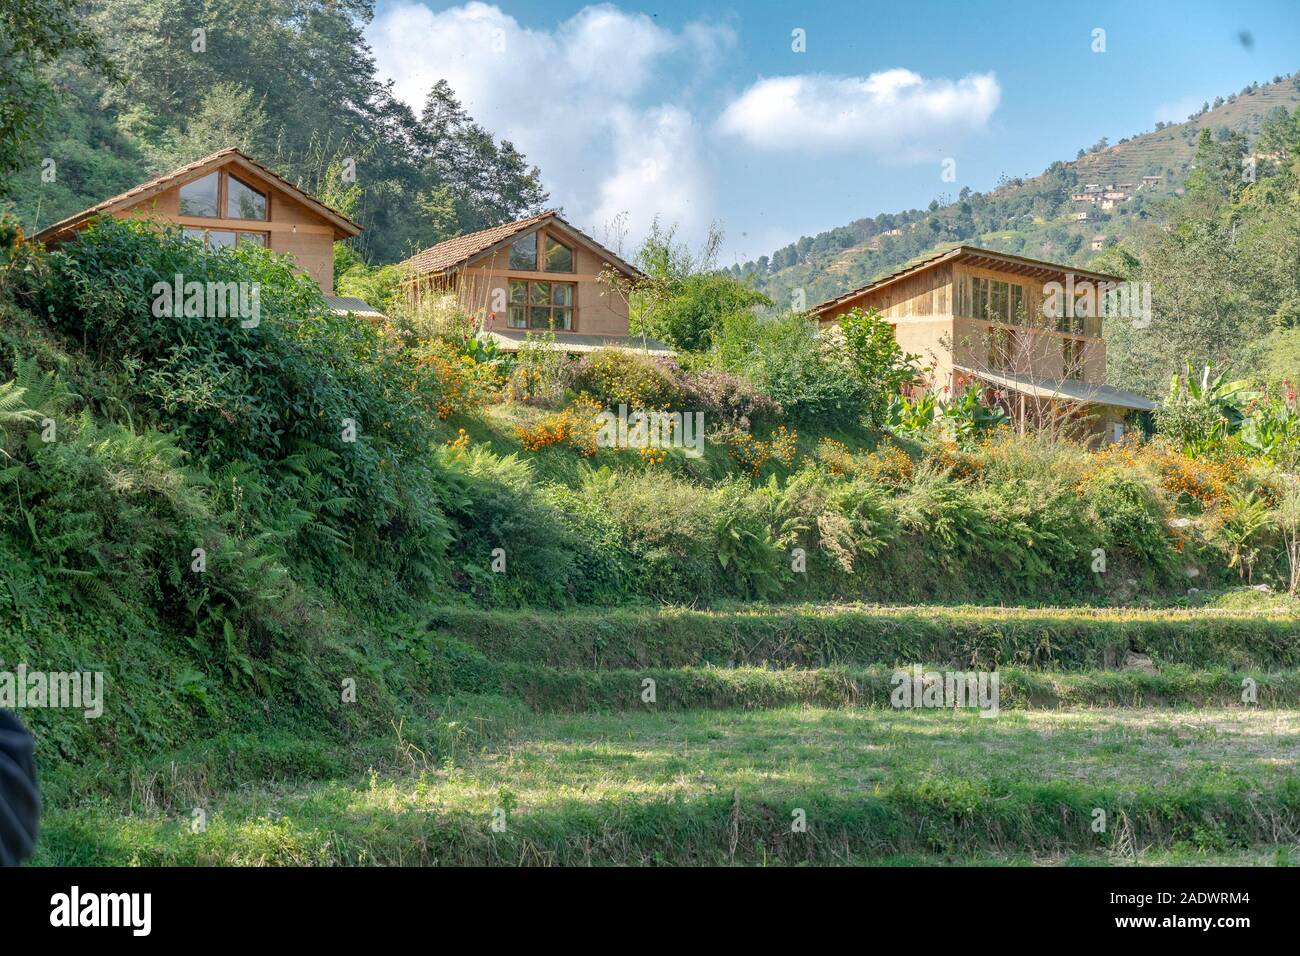 Rammed Earth Cottages on Rural Nepal Farm with Blue Skies Stock Photo -  Alamy